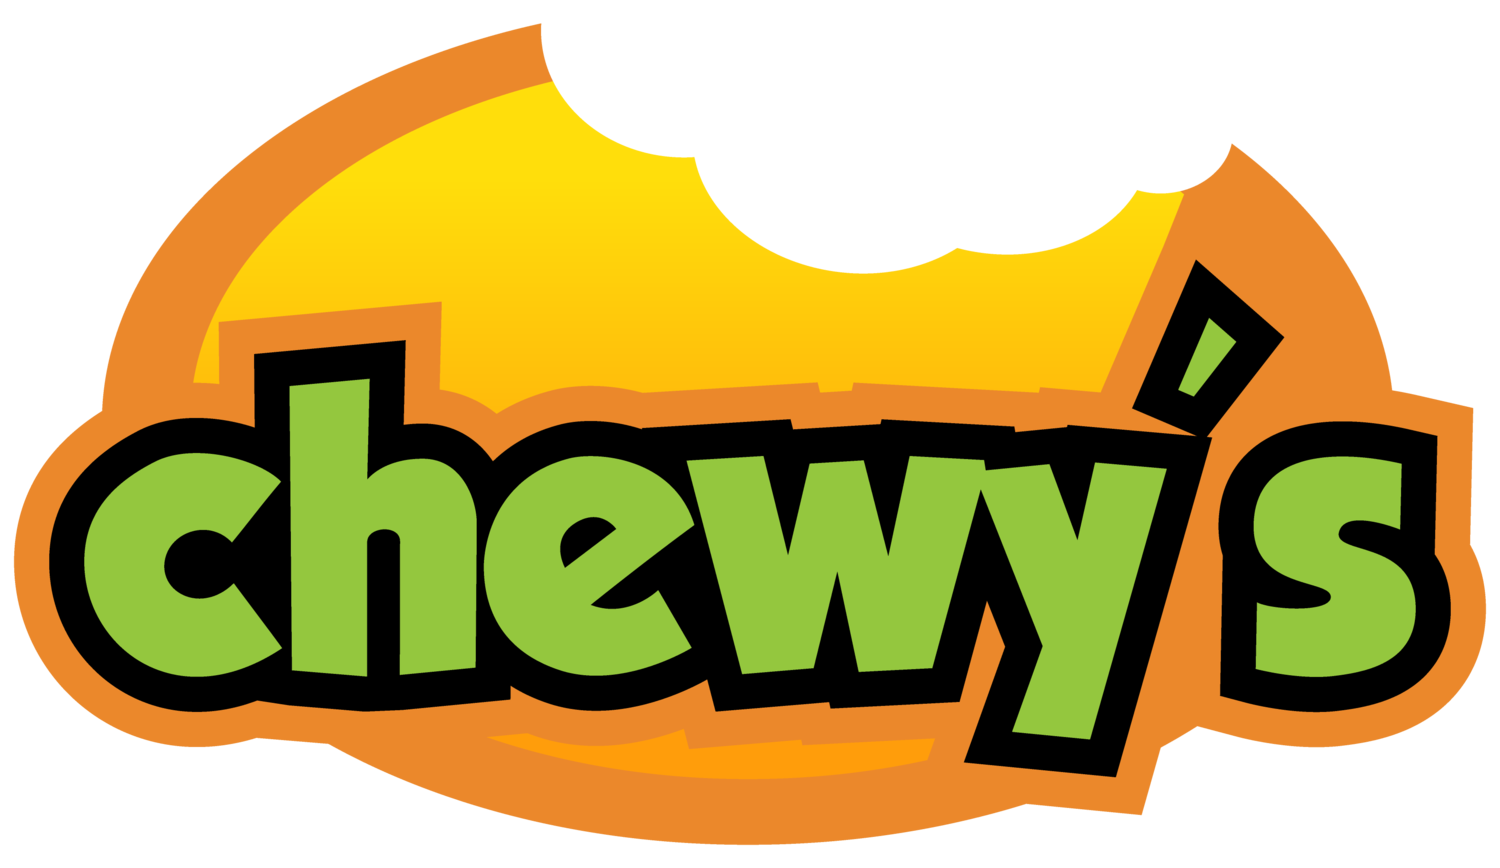 Chewy's Philly